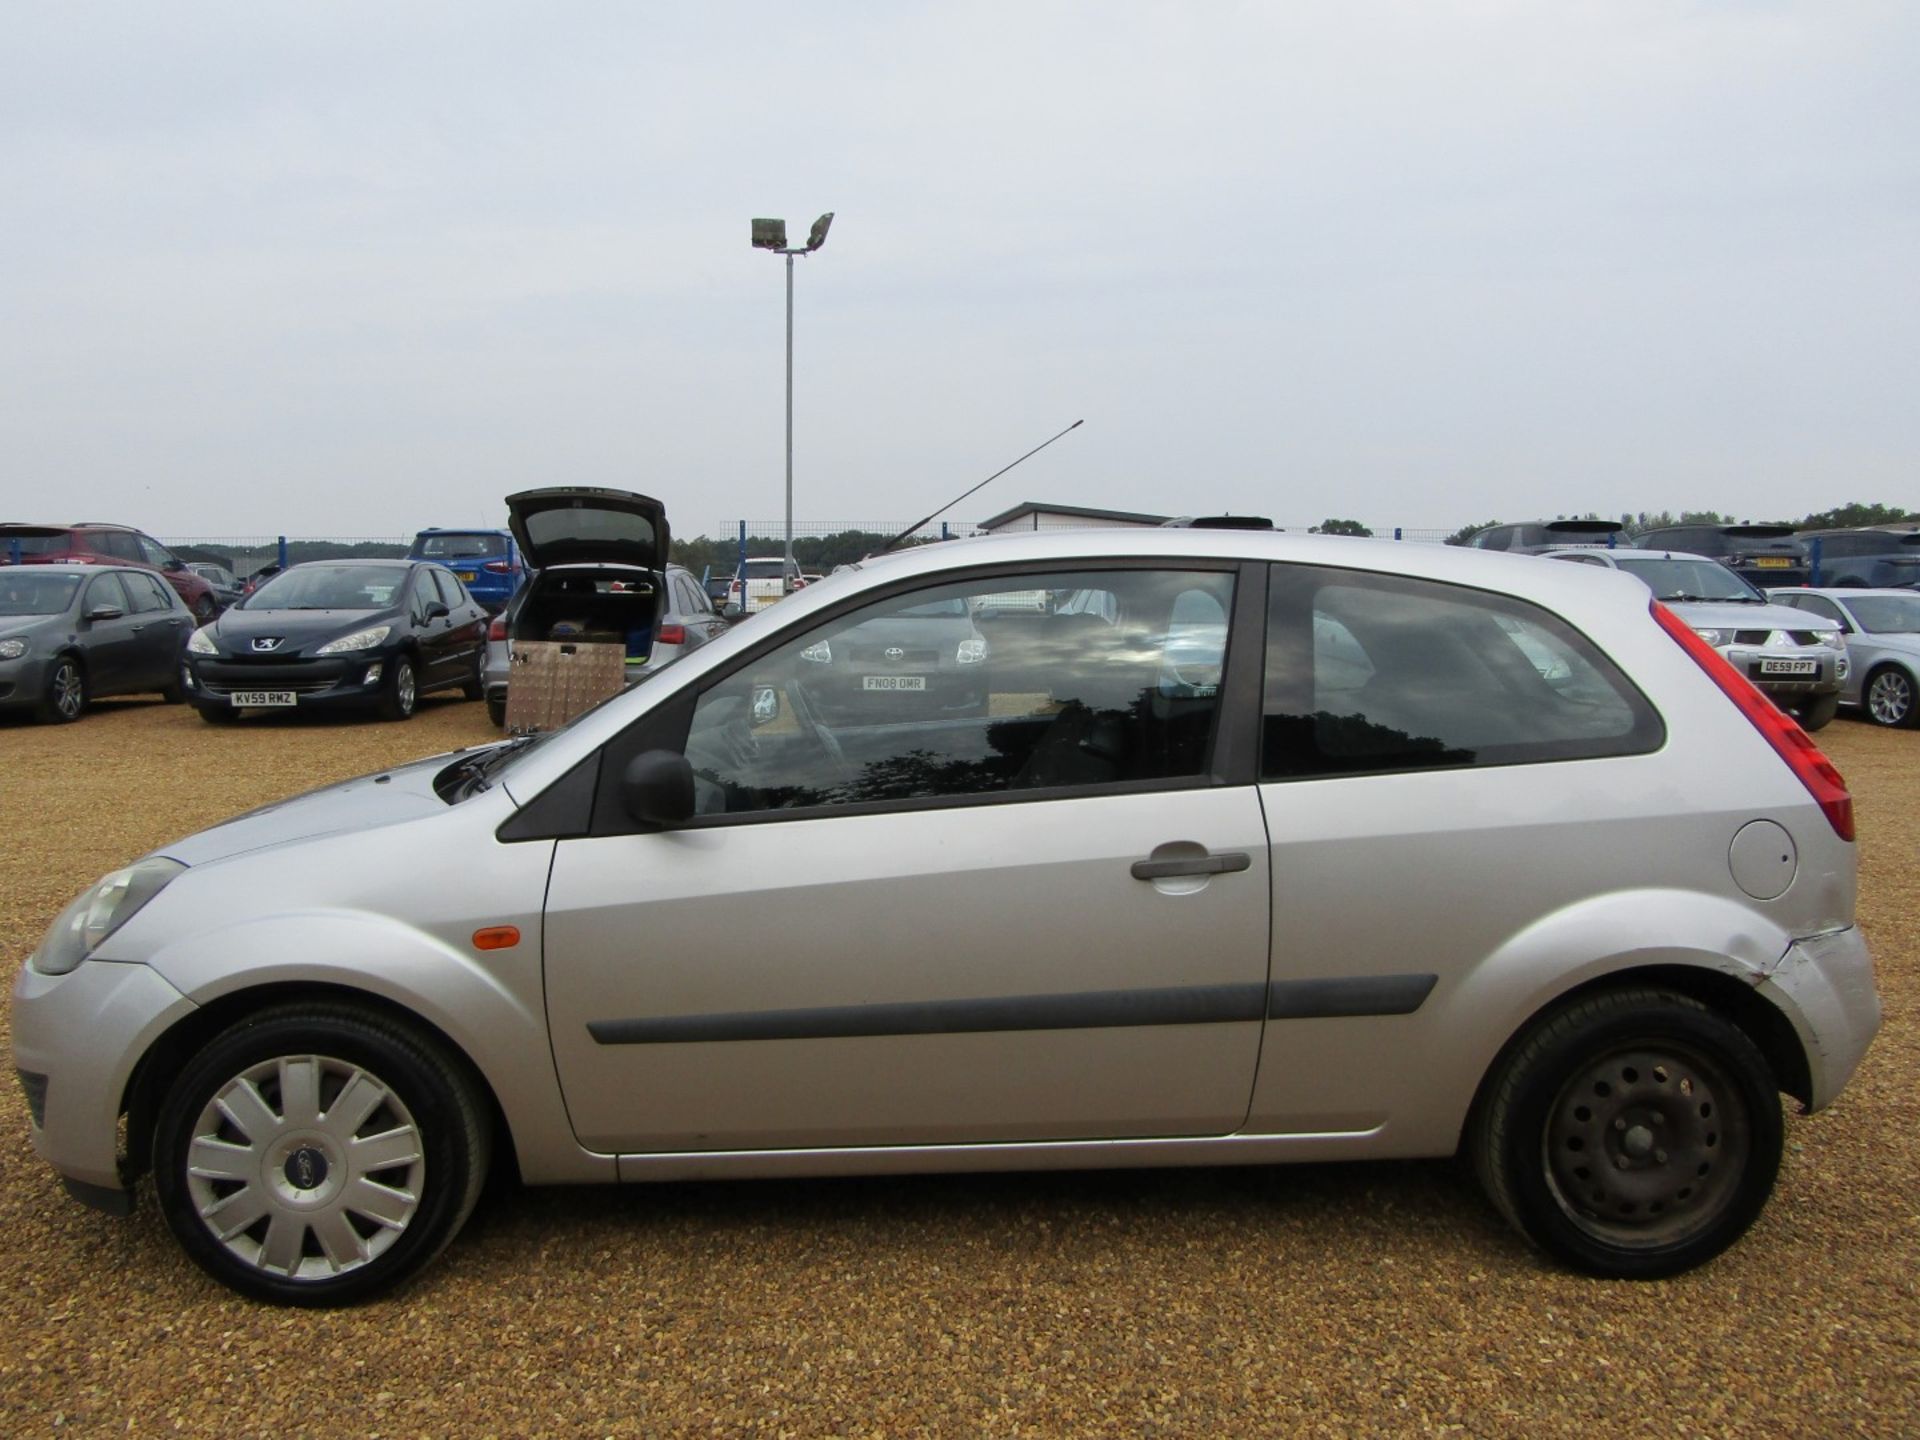 57 07 Ford Fiesta Style - Image 19 of 19